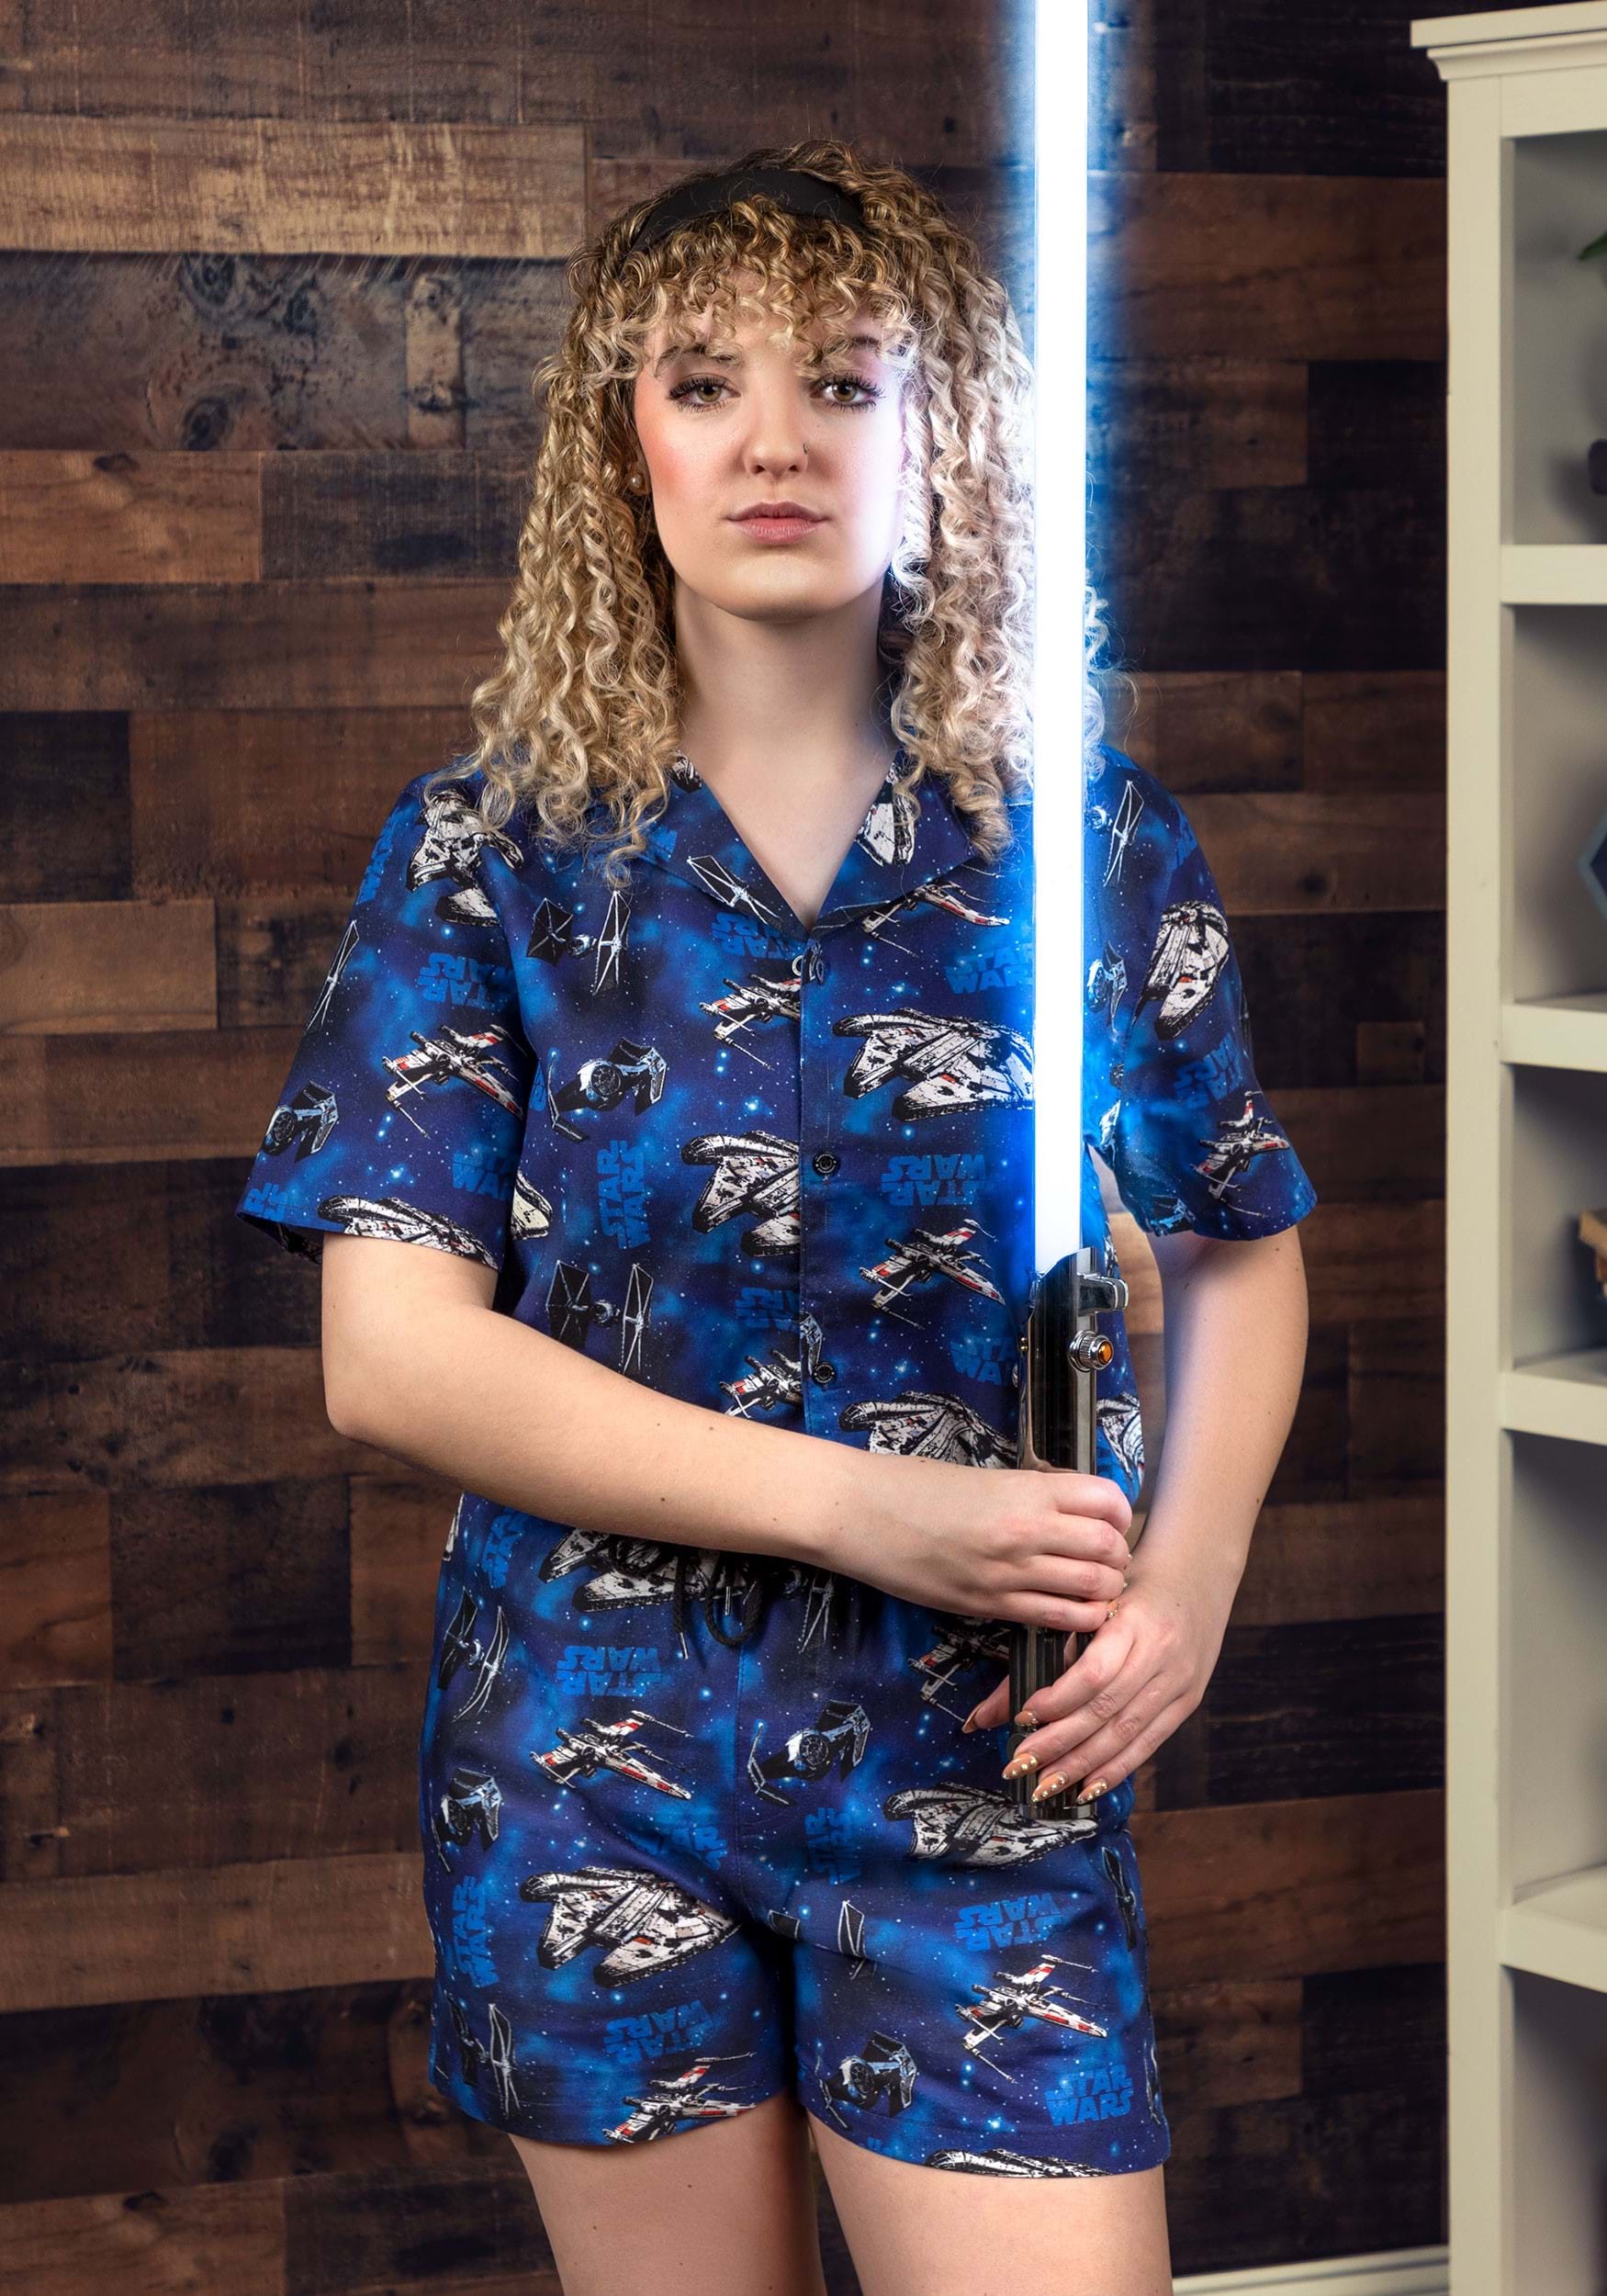 Adult Star Wars Co-ord Cakeworthy Shorts , Star Wars Adult Apparel